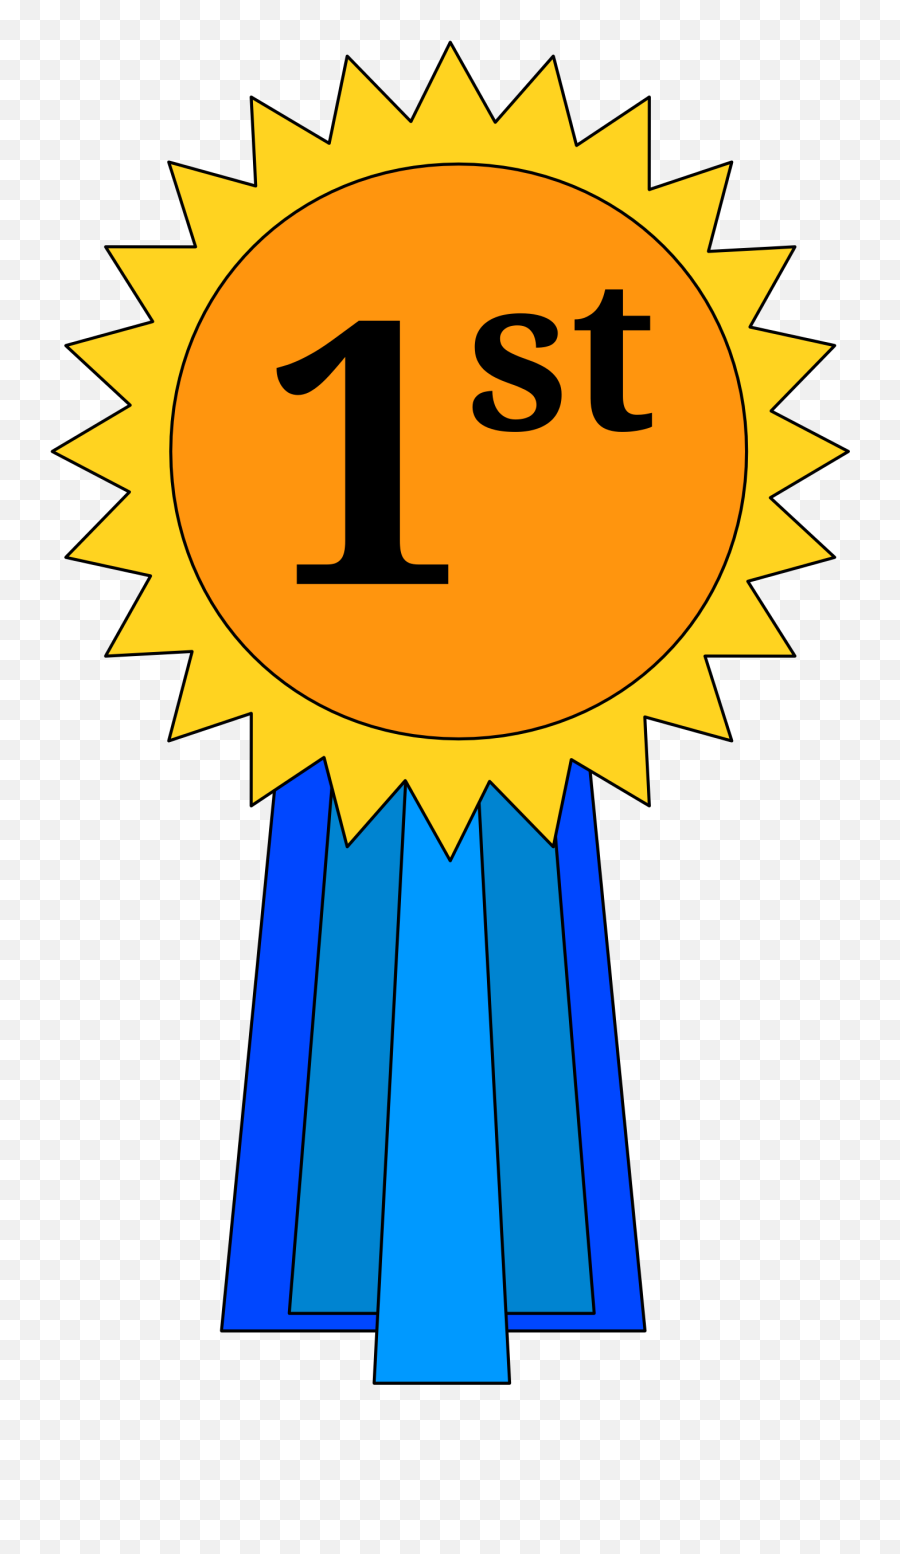 Free 2nd Place Ribbon Png Download Clip Art - Congratulations On 1st Position,Winner Ribbon Png